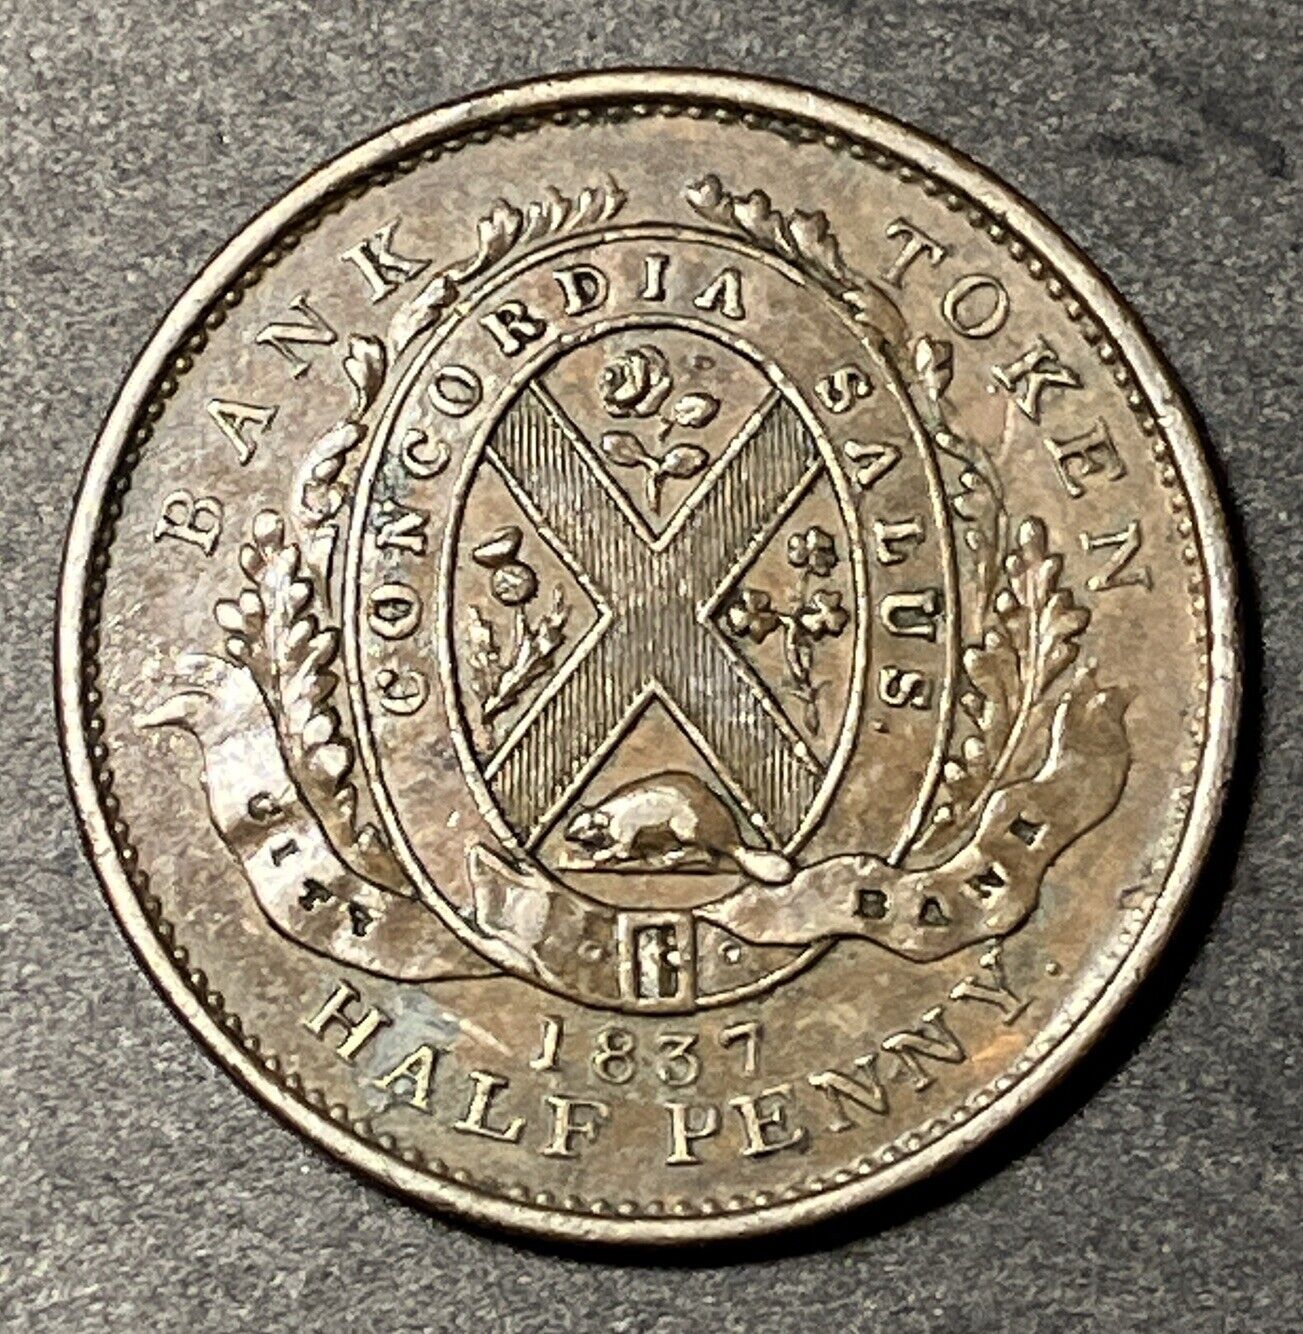 1837 Lower Canada City Bank Half Penny Br-522, Lc-8A2